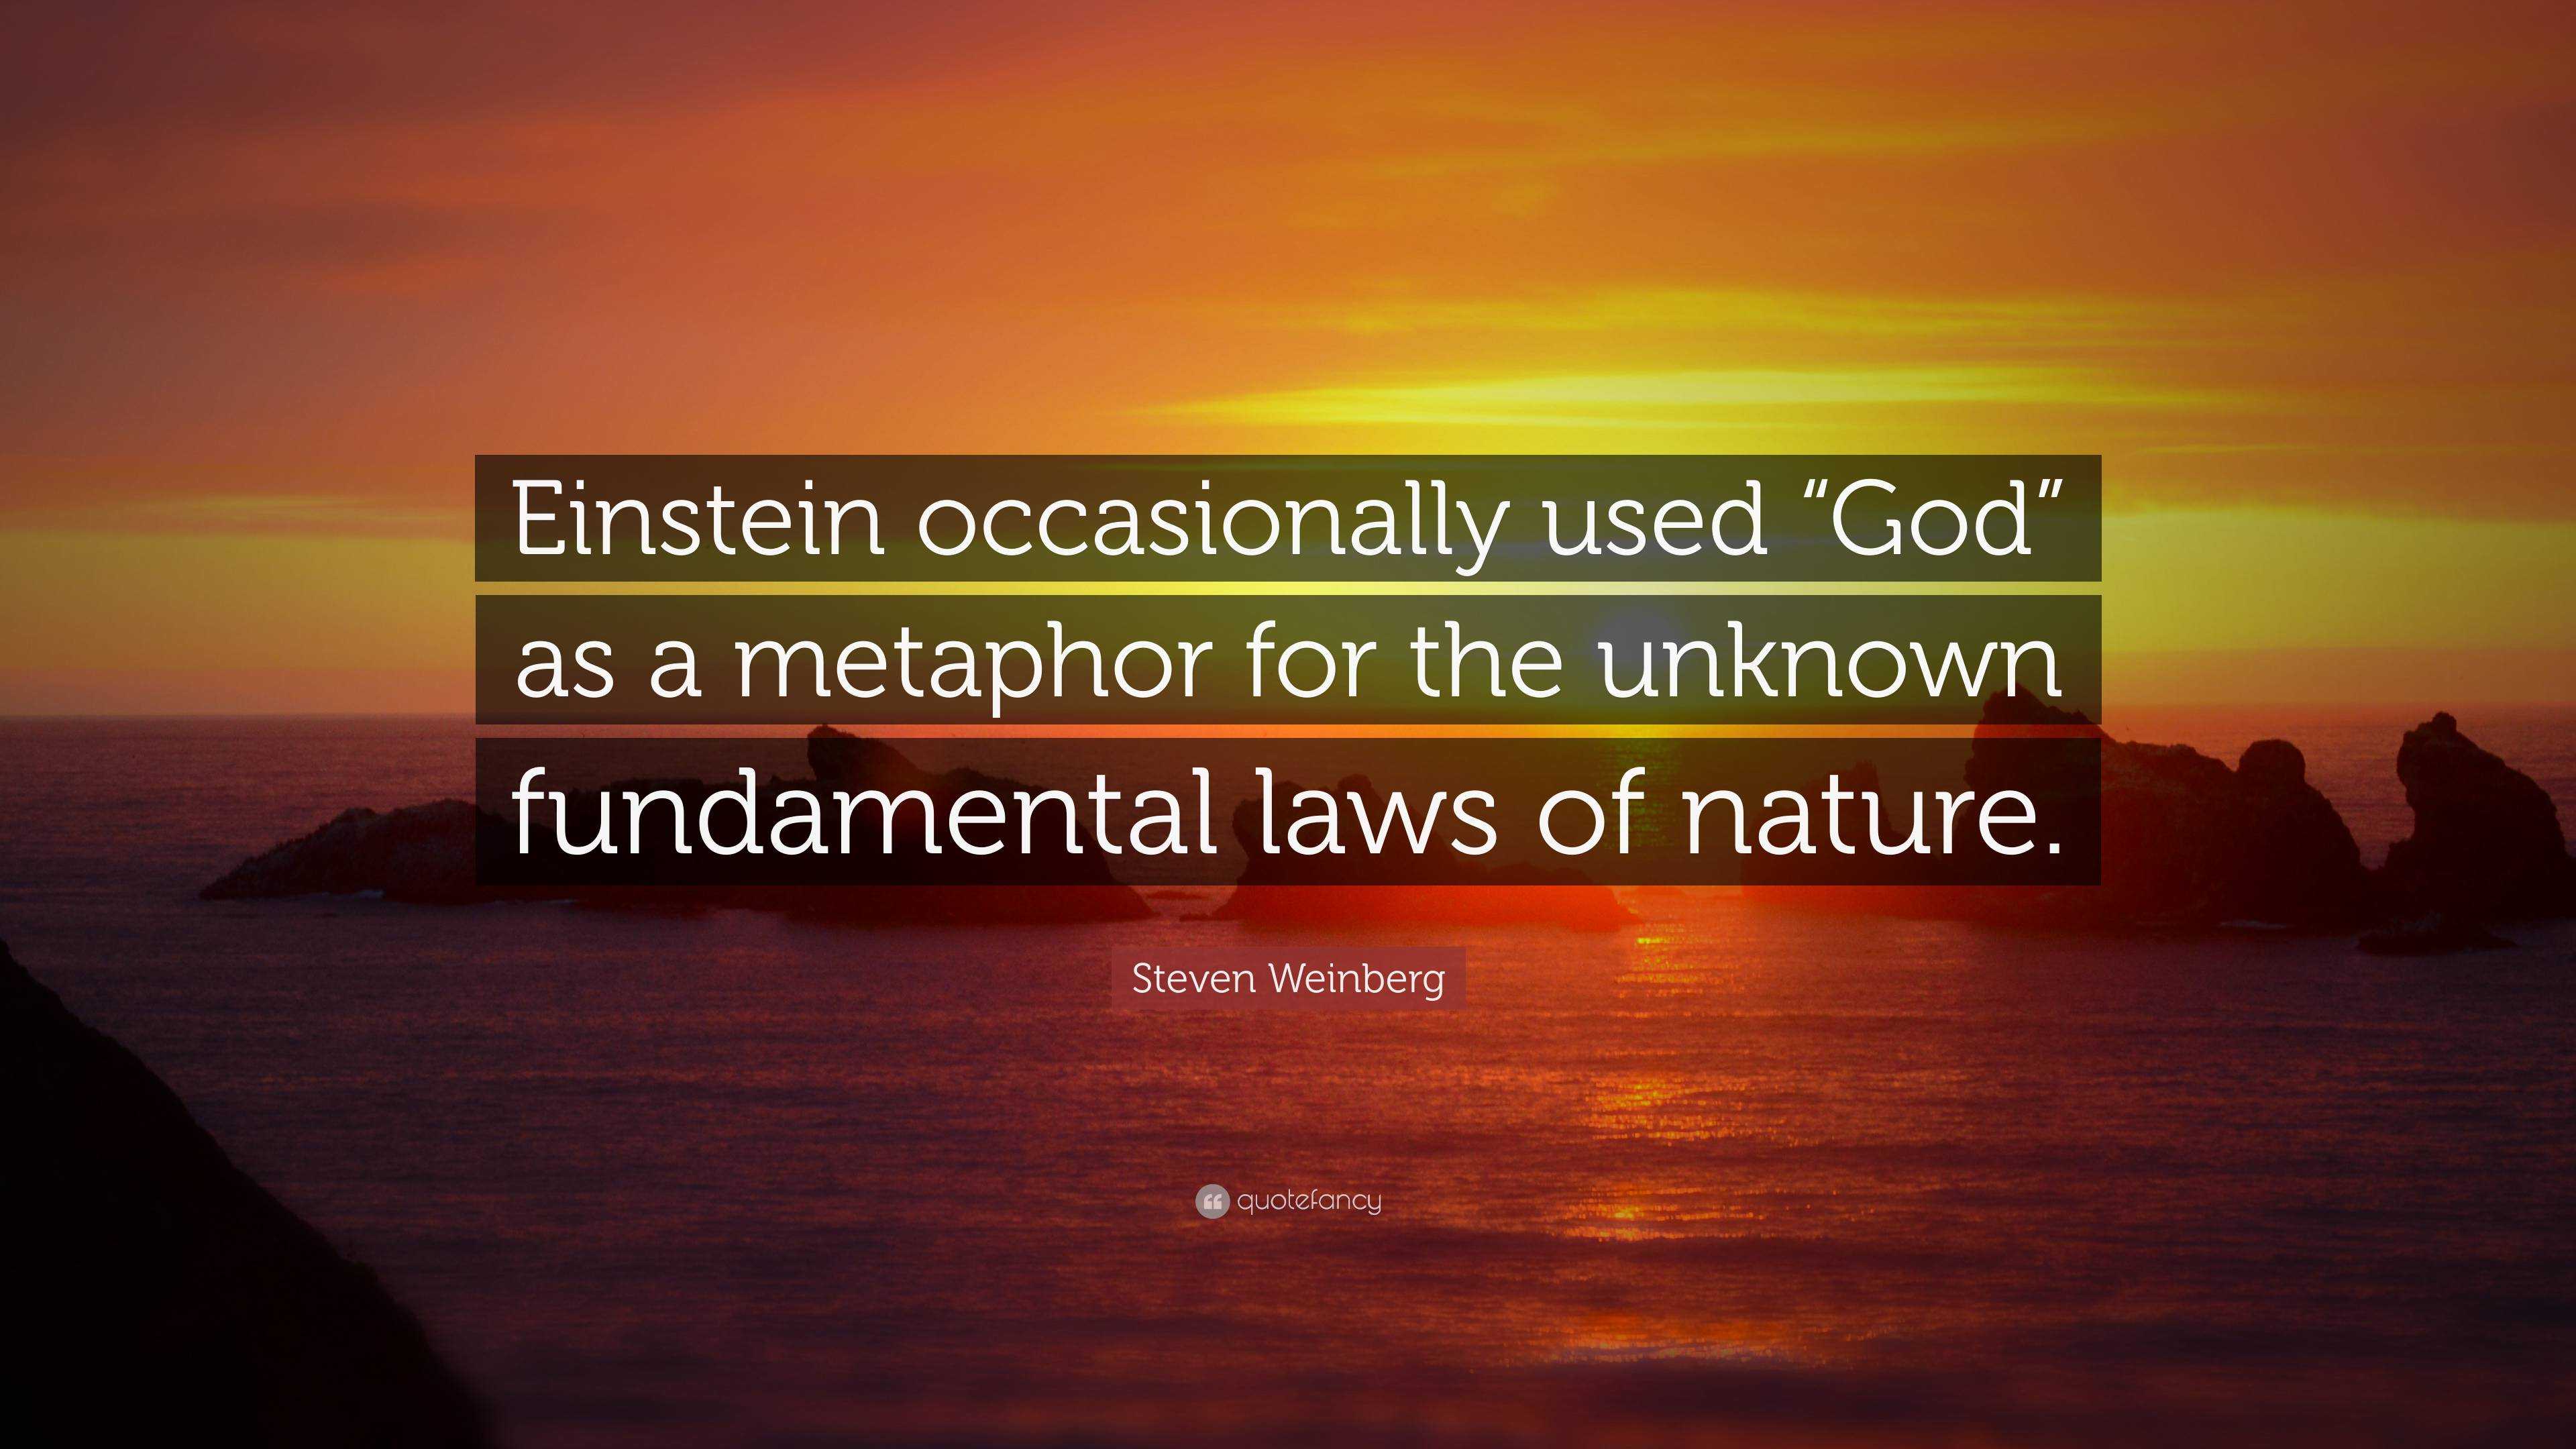 Steven Weinberg Quote: “Einstein occasionally used “God” as a